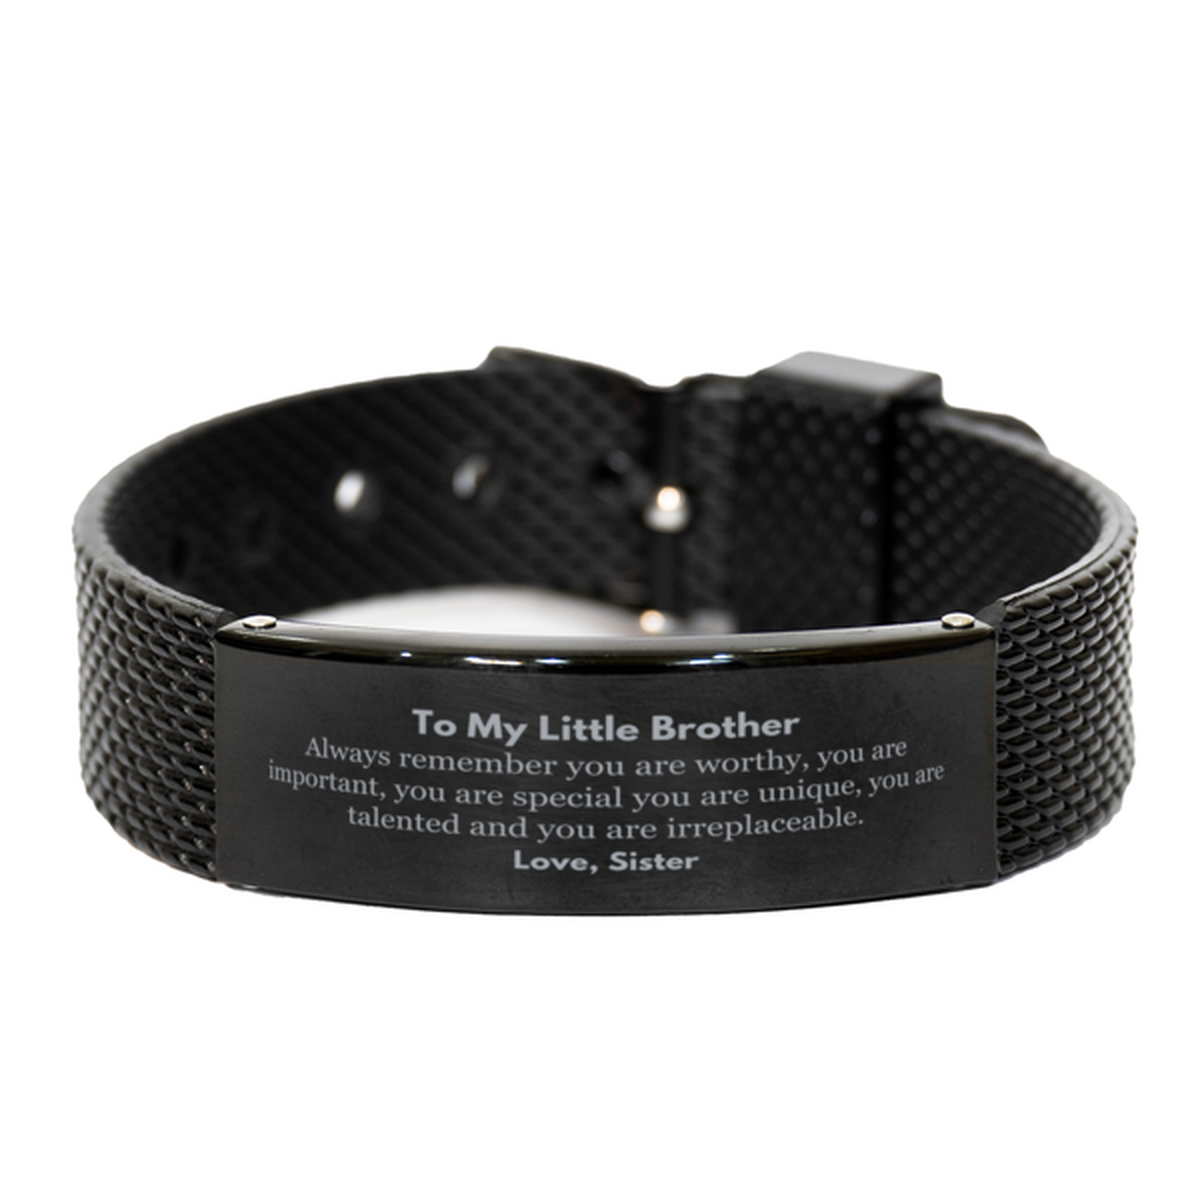 Little Brother Birthday Gifts from Sister, Inspirational Black Shark Mesh Bracelet for Little Brother Christmas Graduation Gifts for Little Brother Always remember you are worthy, you are important. Love, Sister